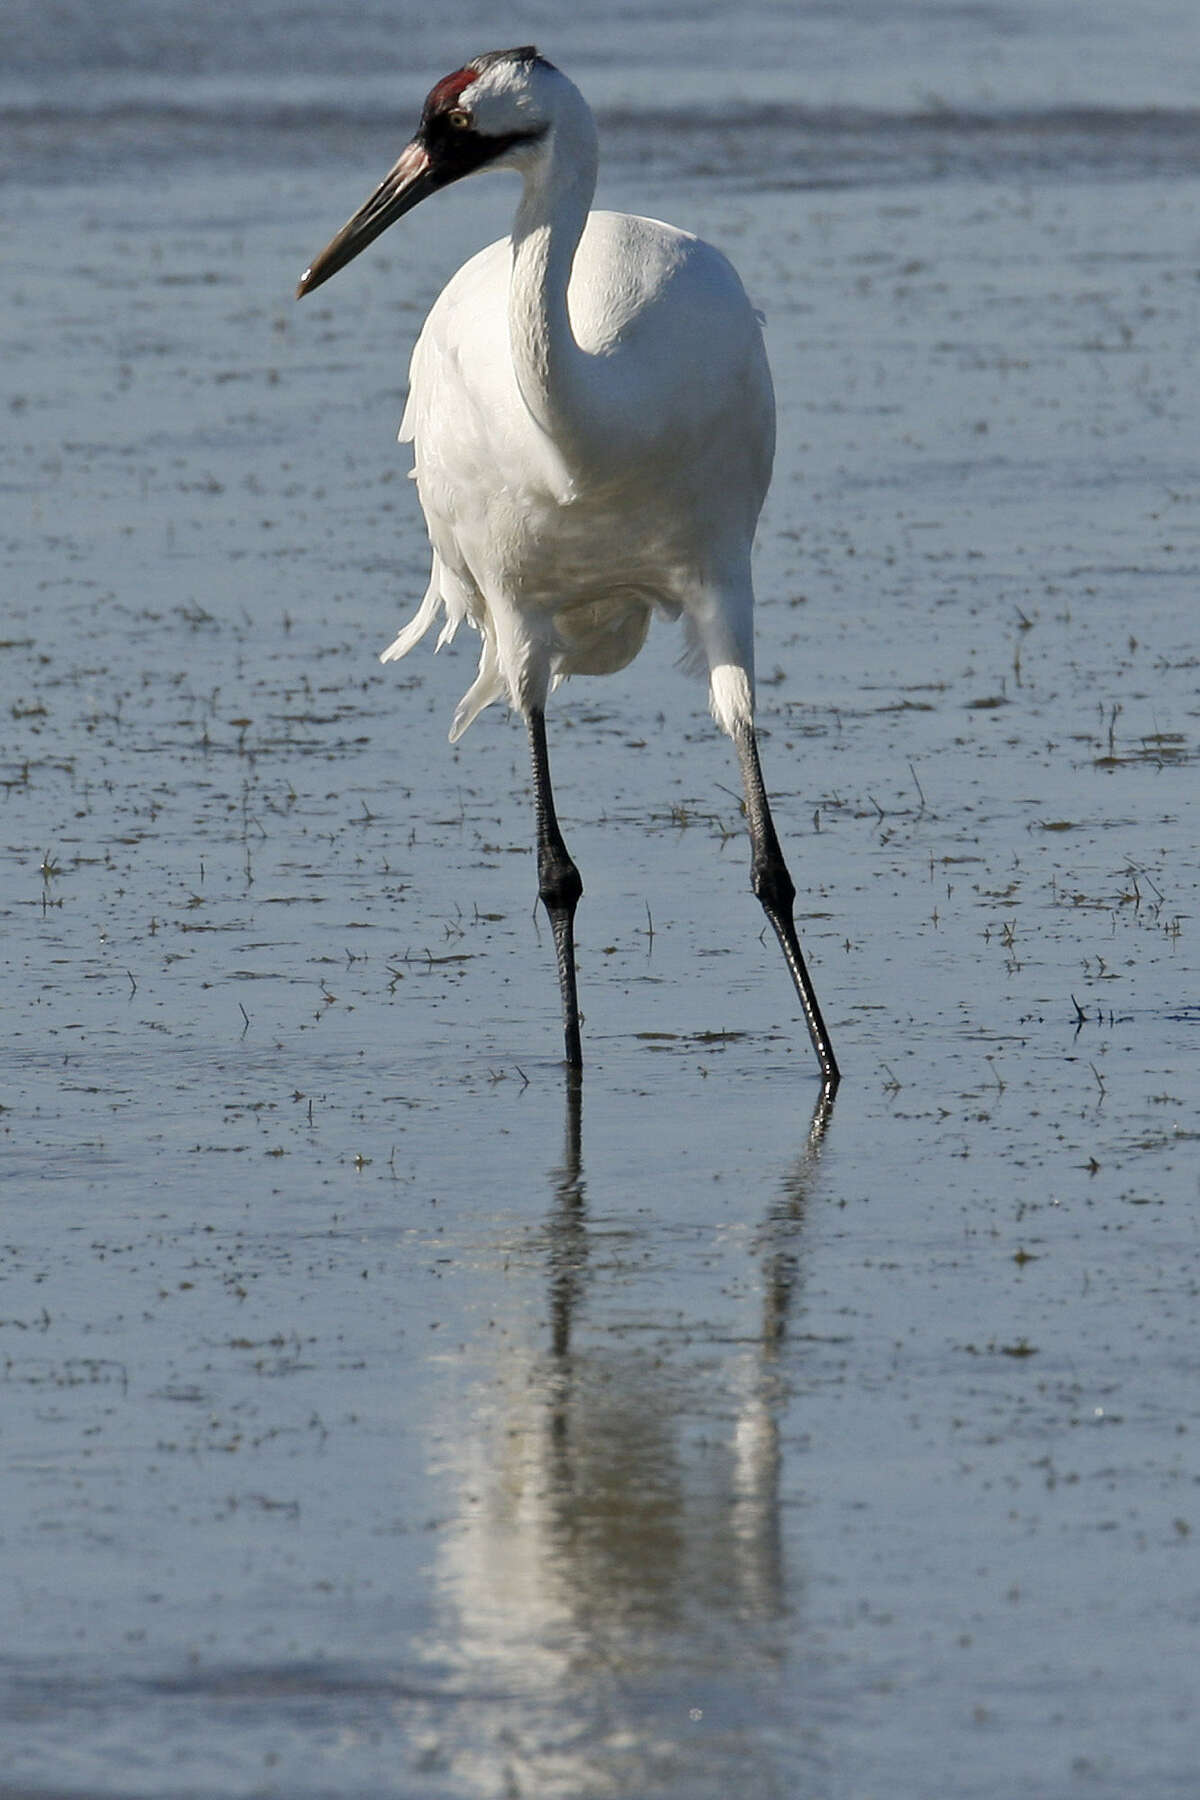 The Whooping Crane Festival includes boat tours Feb. 21-24 in Port Aransas.